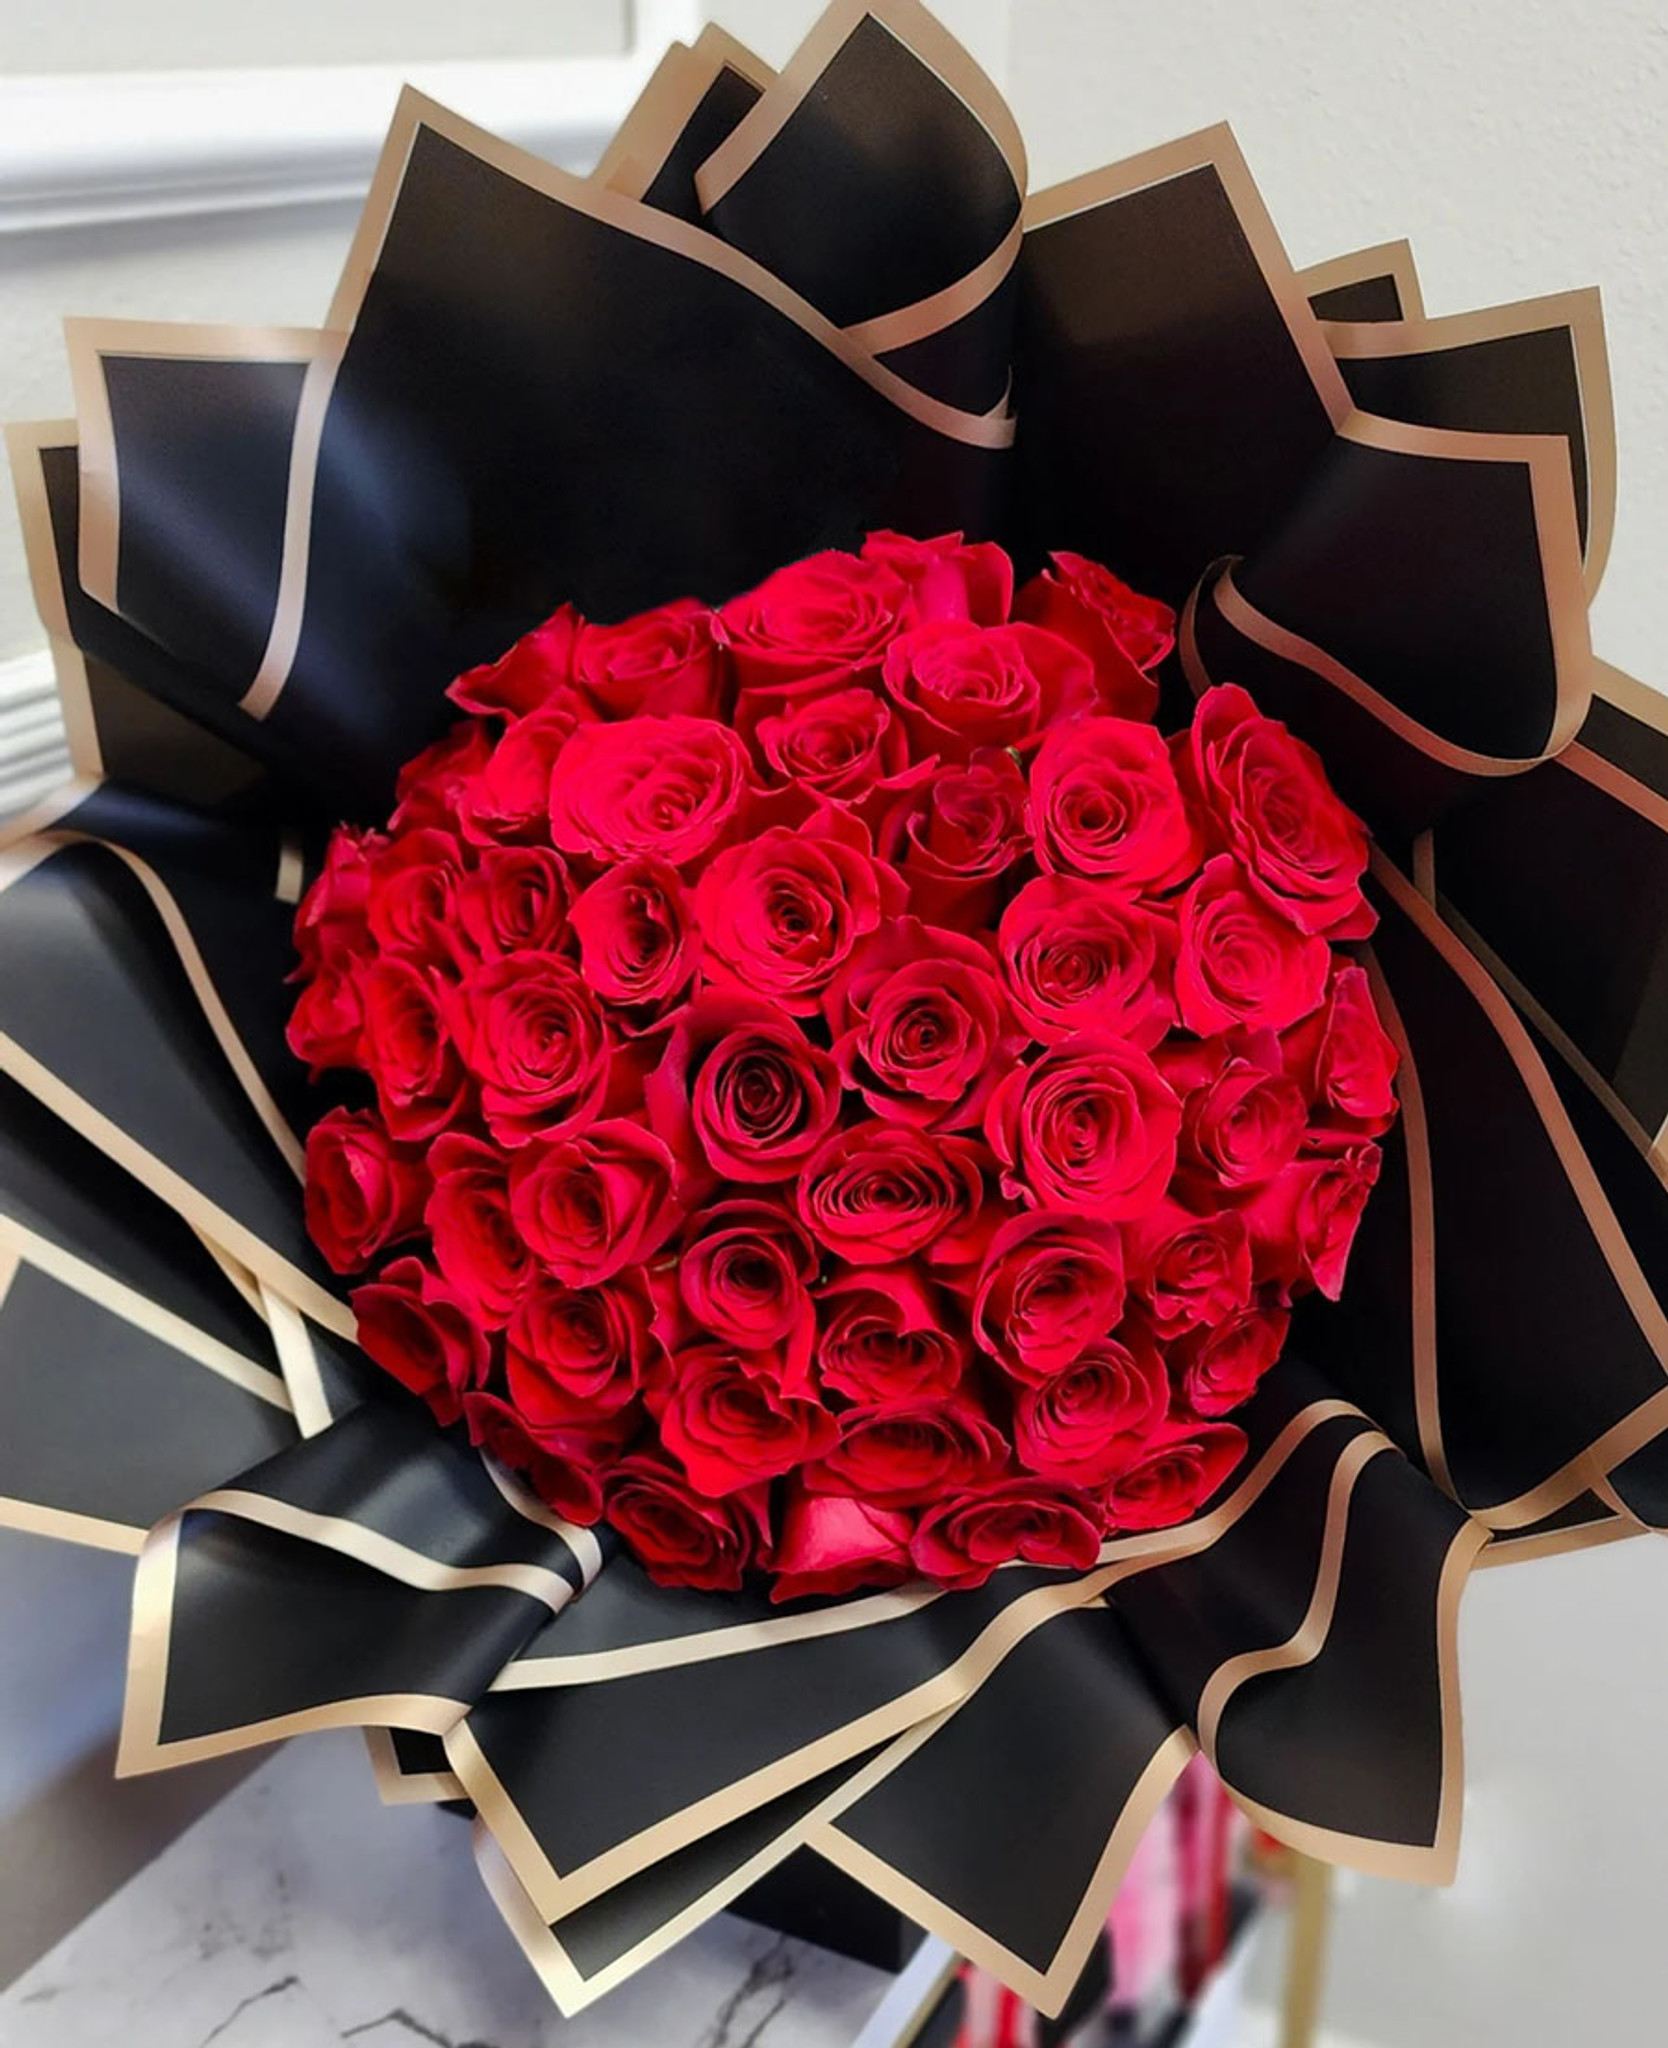 50 fabulous premium roses wrapped  - 50 premium long stem roses wrapped in premium waterproof cellophane paper. If a different rose color is desired please specify color in the special instruction box.